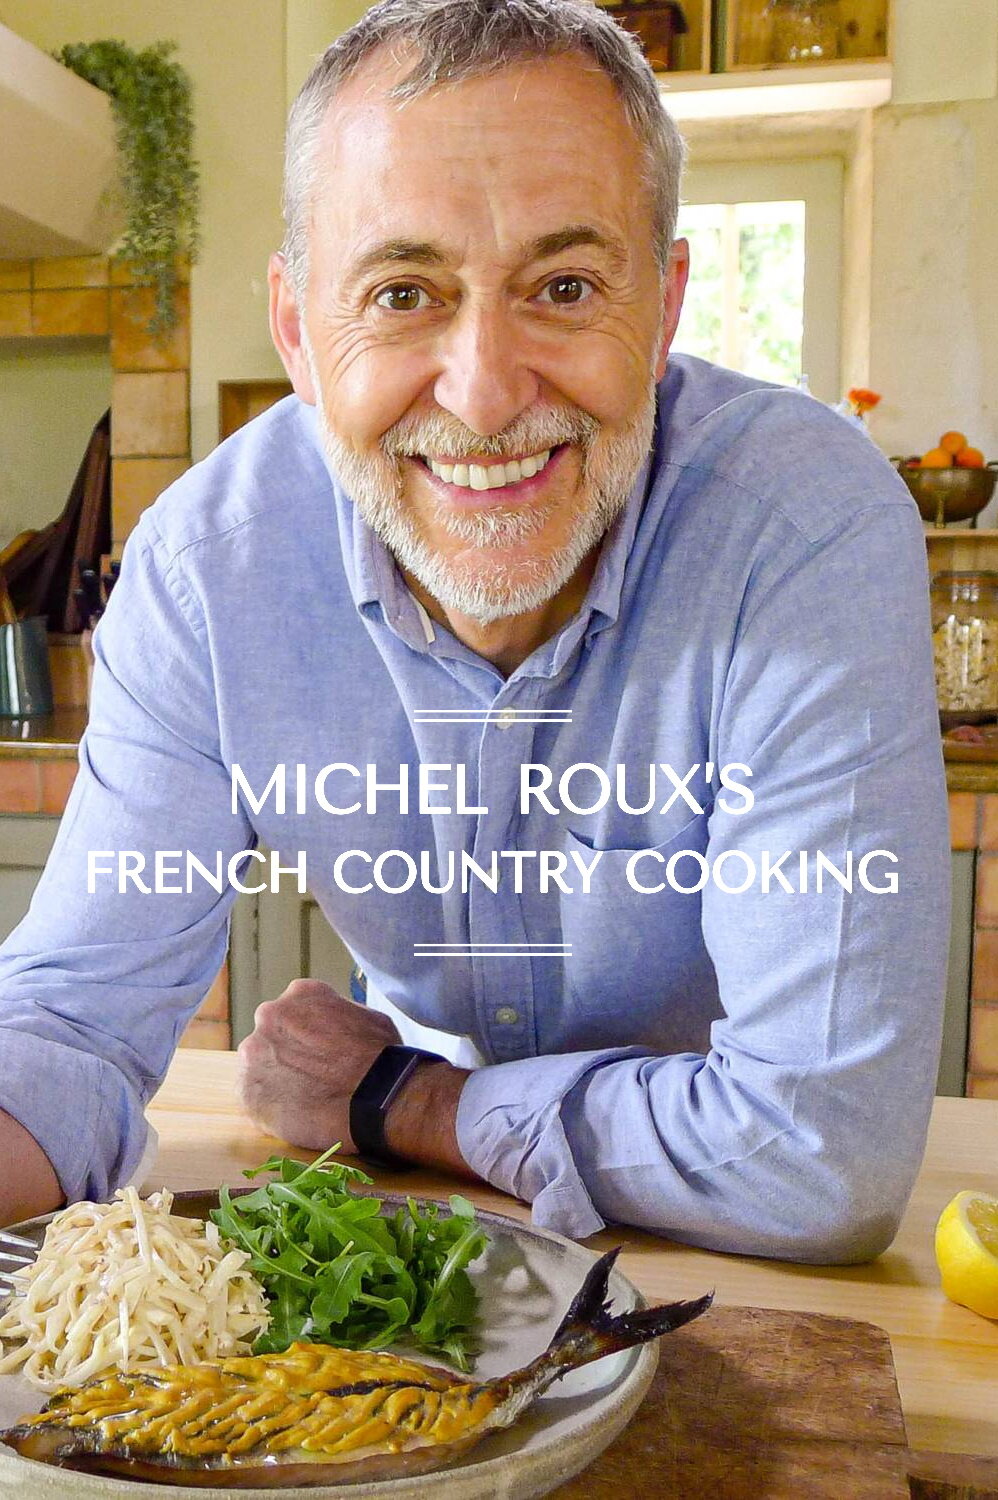 Michel Roux's French Country Cooking ne zaman